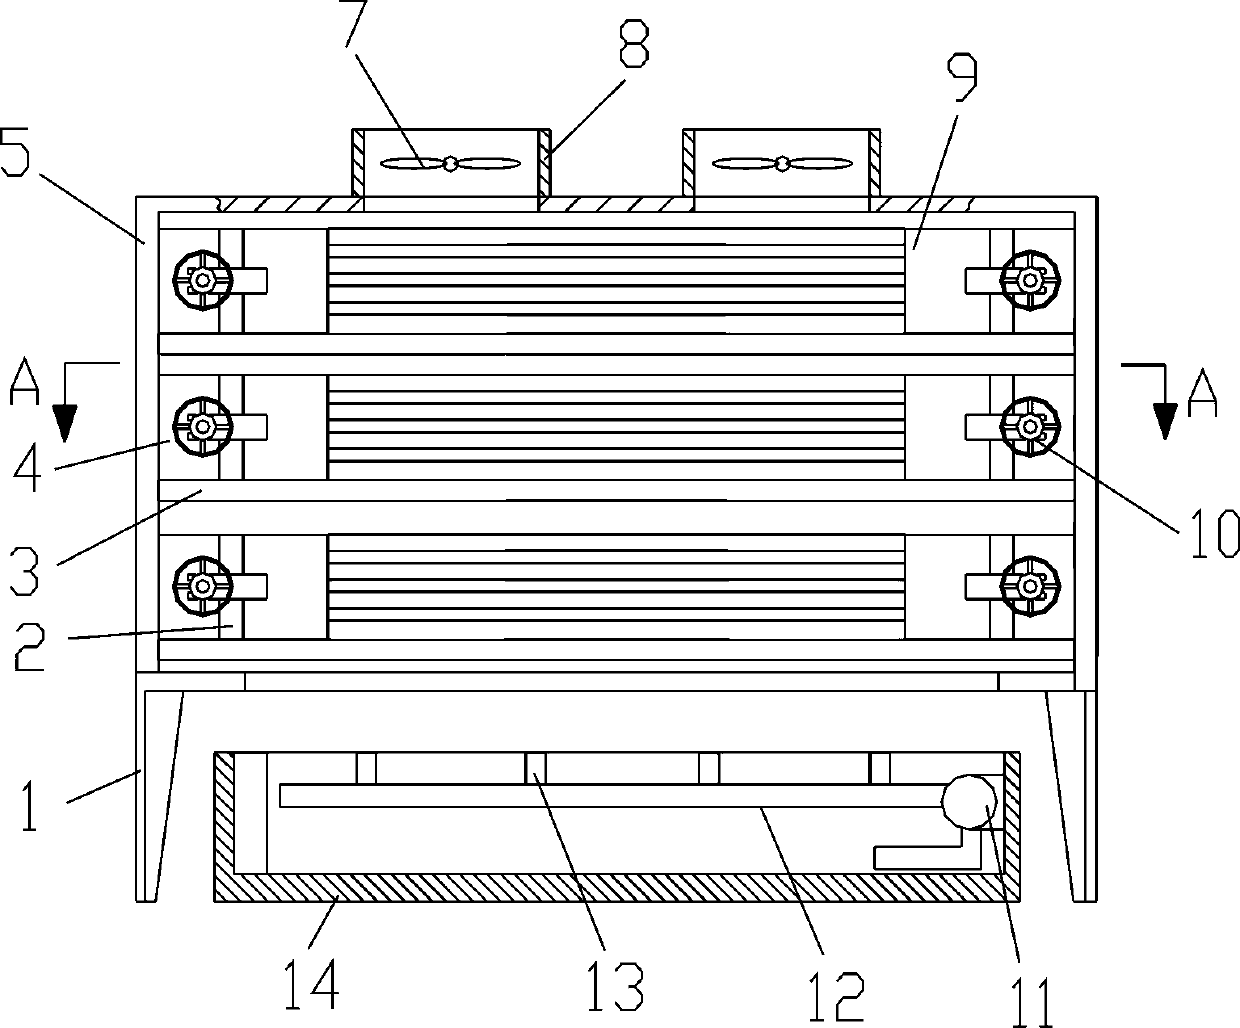 Heat exchange device for purifying industrial oil smoke